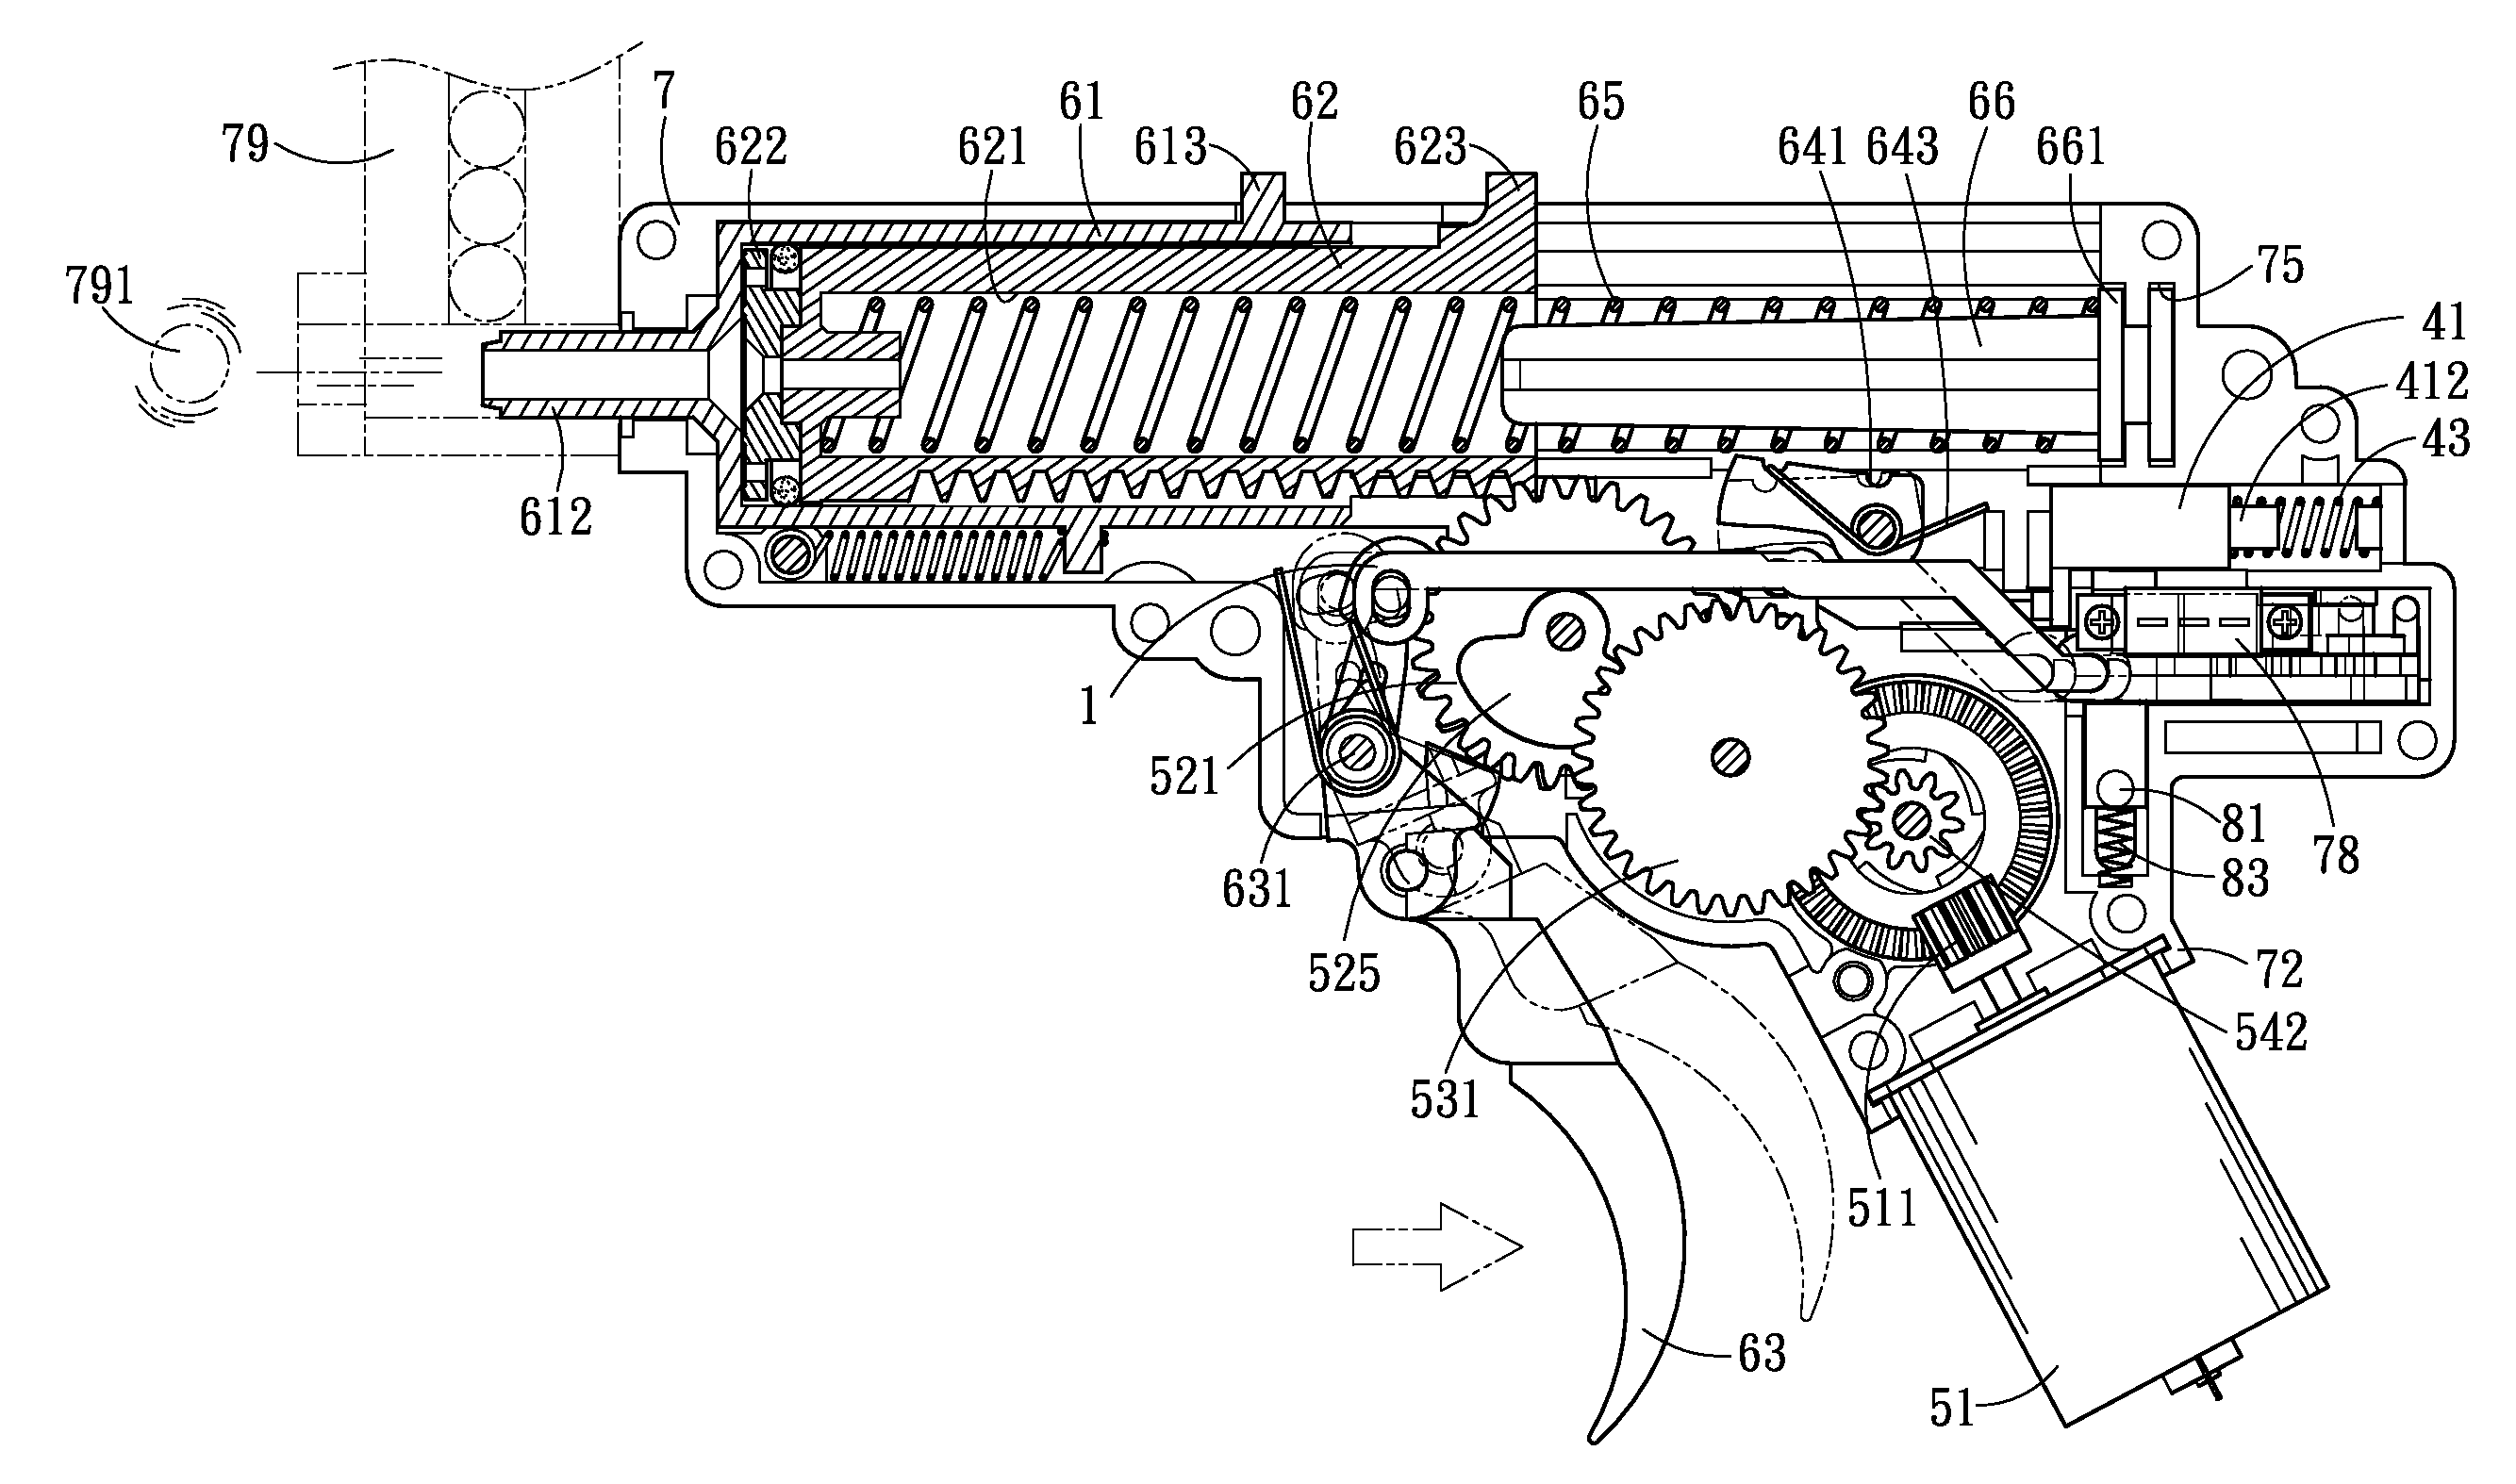 Manually and Electrically Actuating Toy Gun Structure